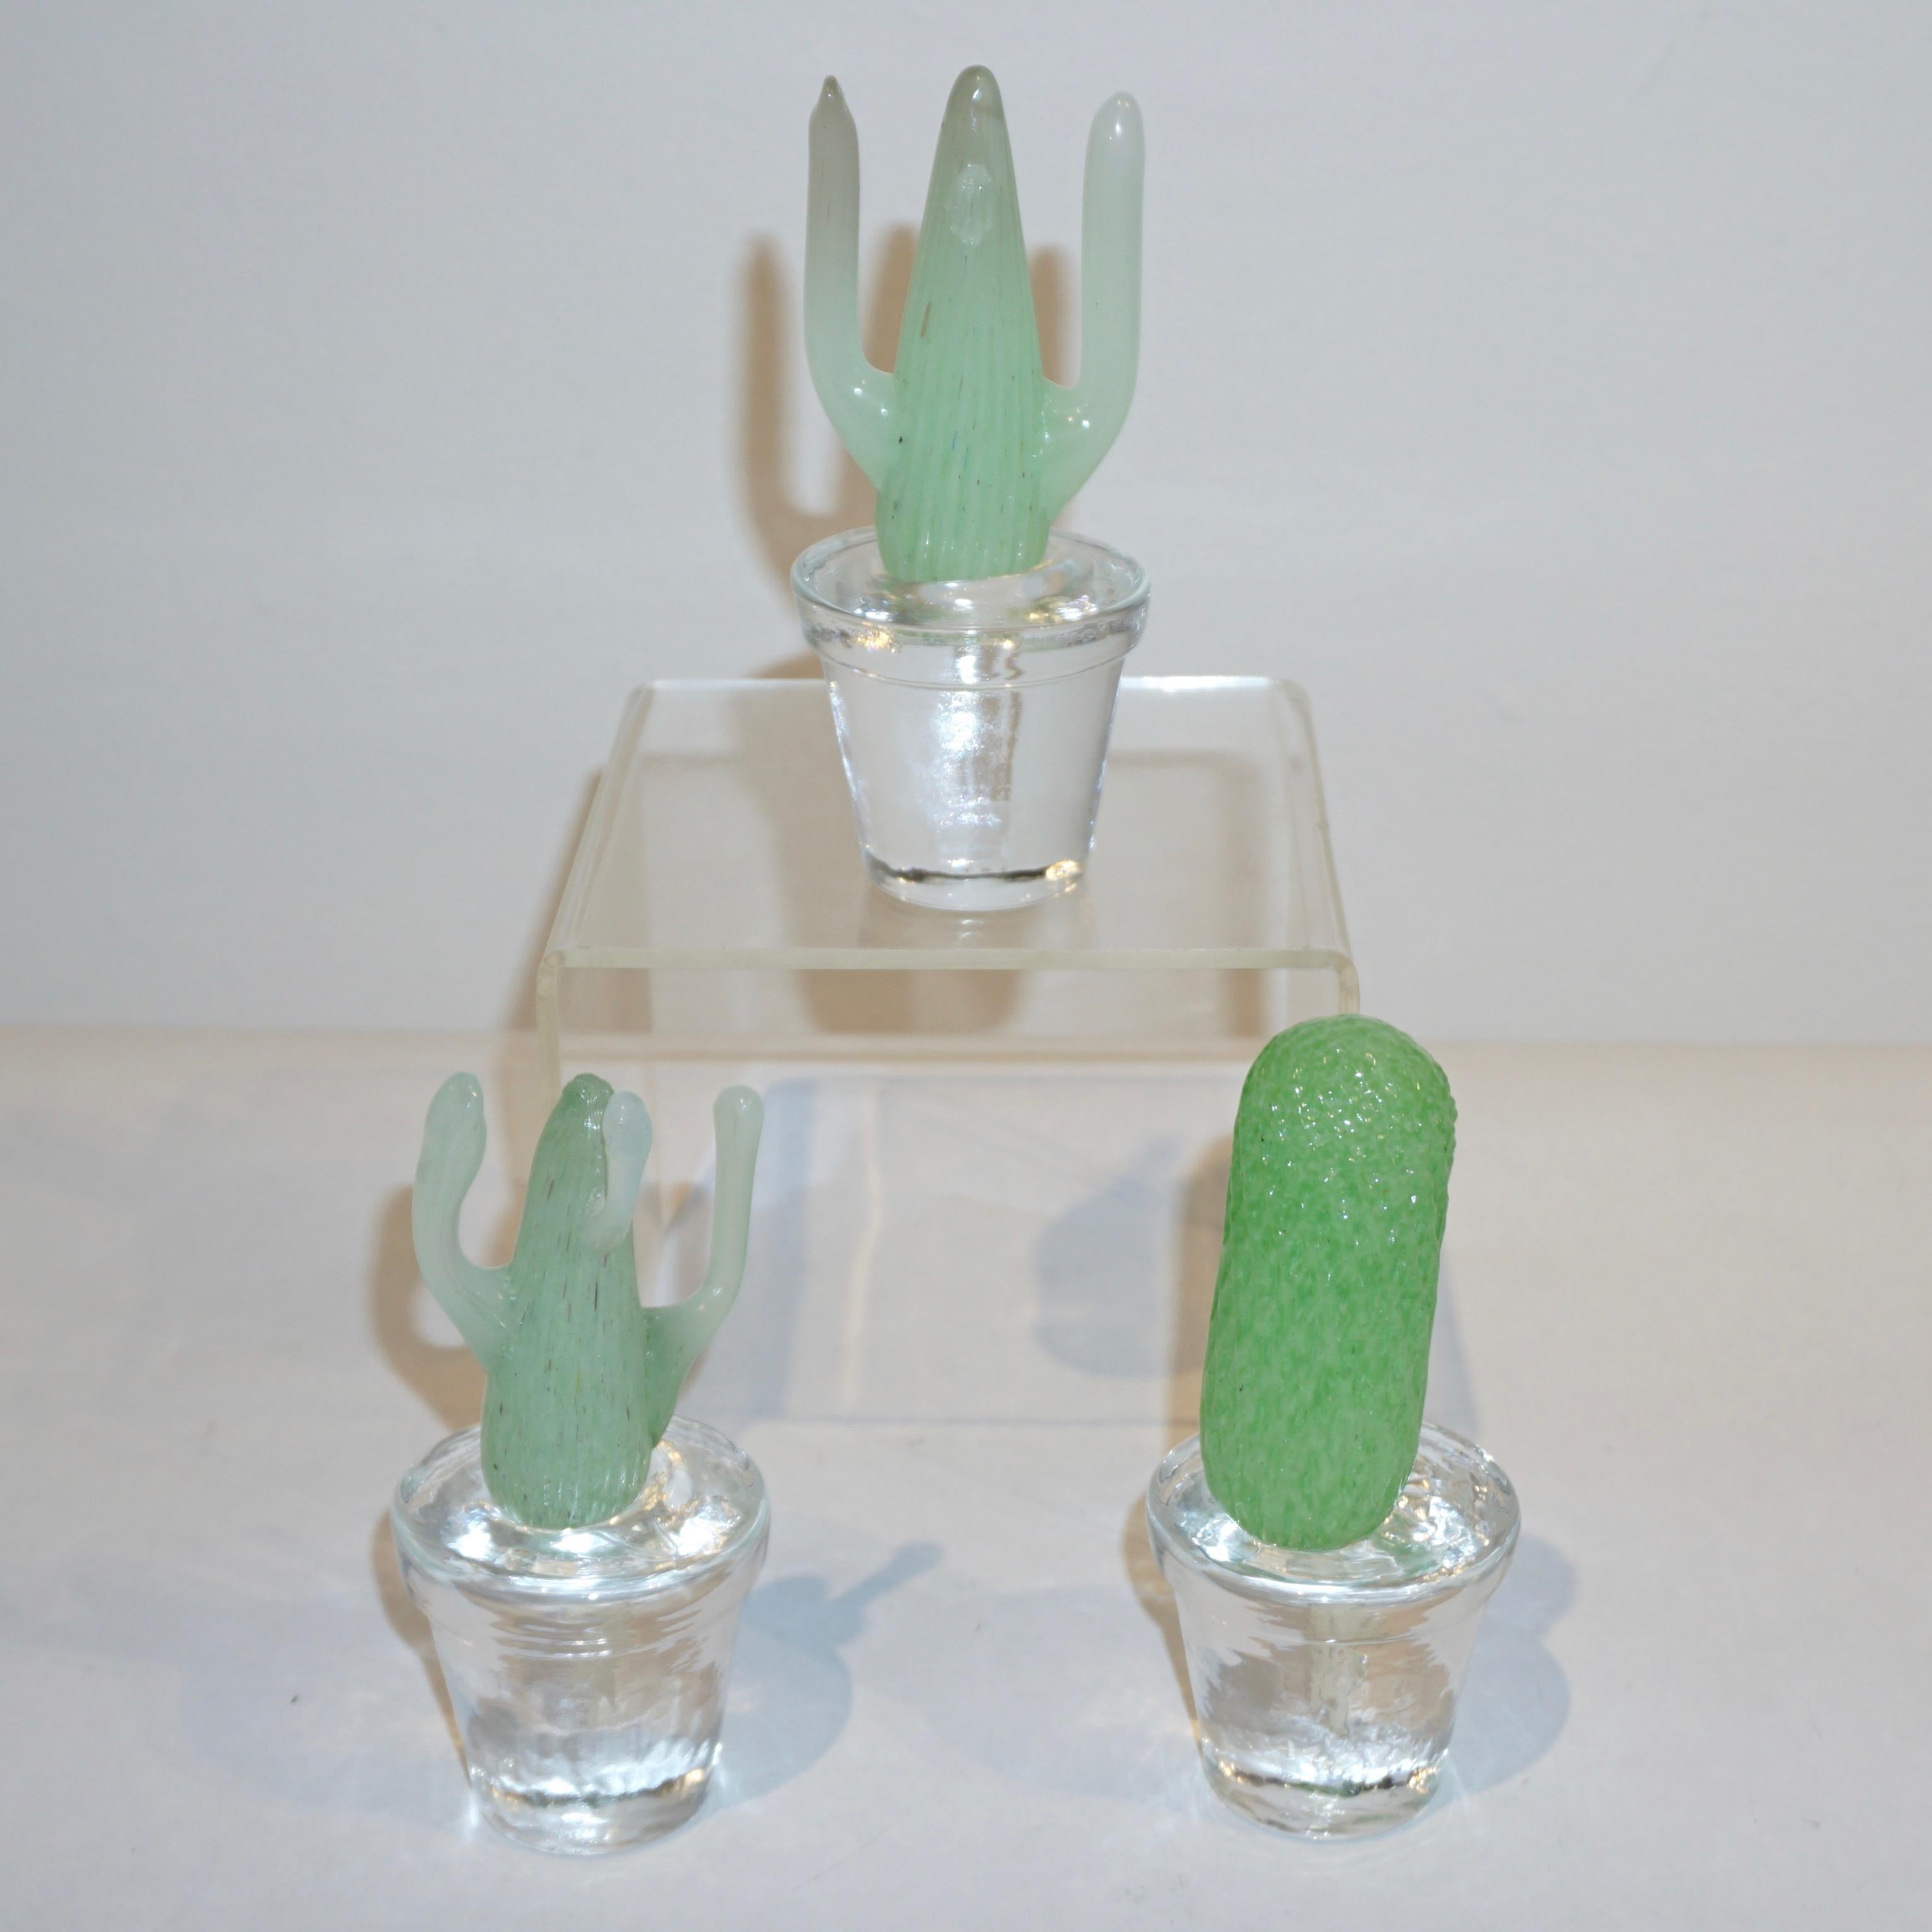 Italian minimalist collectible miniature plants of limited edition, Modern Design by Marta Marzotto, realized by Formia, 3 different lifelike organic shapes in verdant emerald green and light pea green color, planted in crystal clear Murano Glass